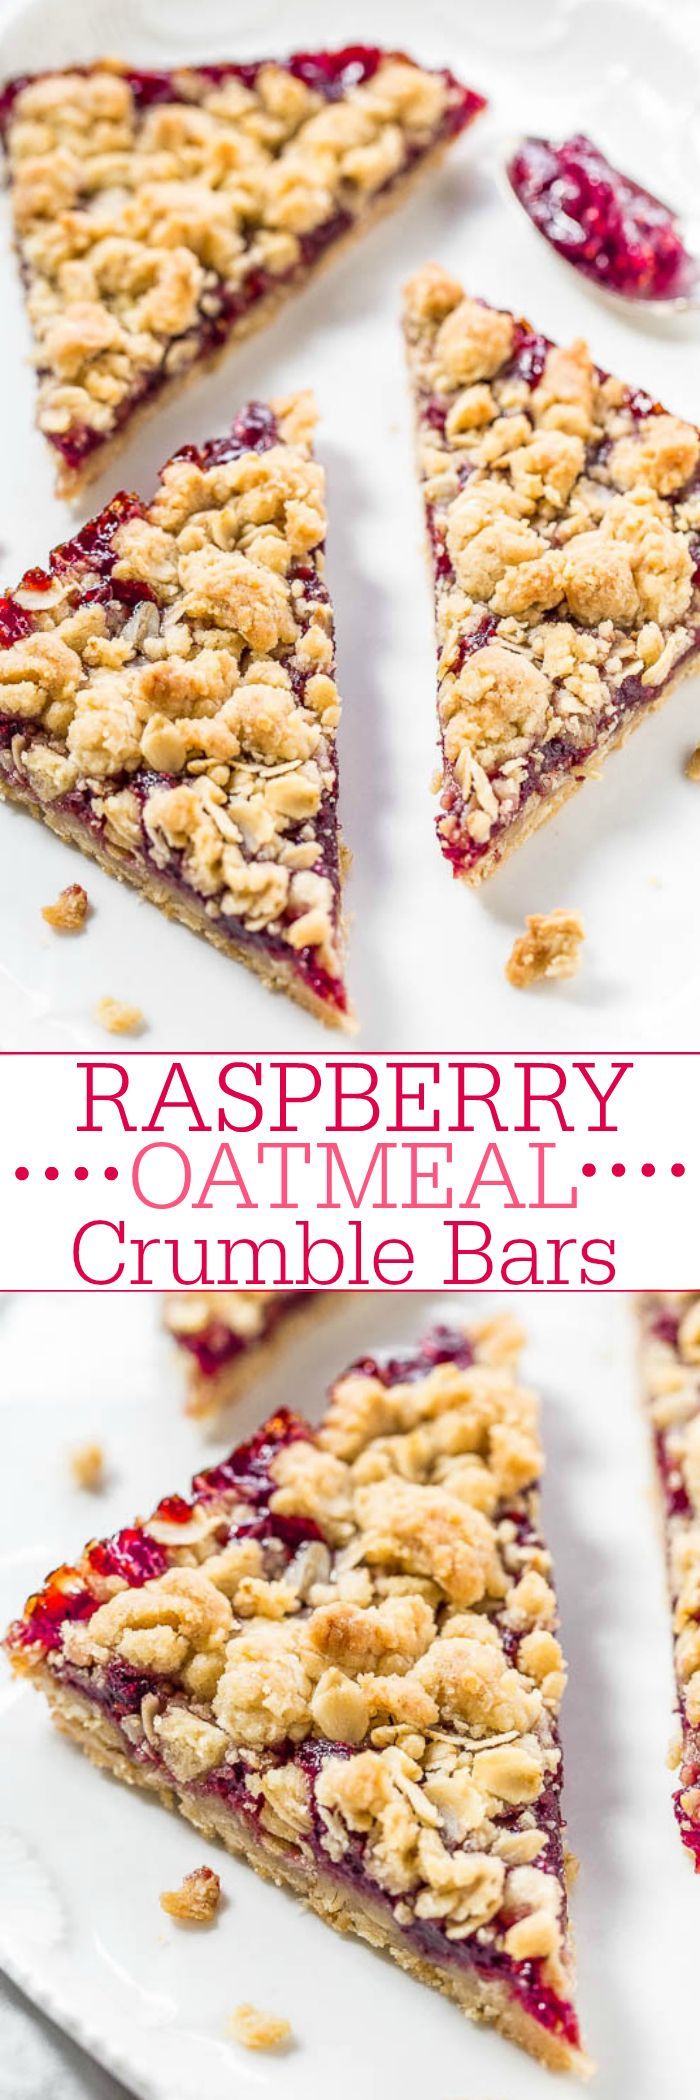 Raspberry Oatmeal Crumble Bars – Fast, easy, no-mixer bars great for breakfast, snacks, or a healthy dessert!! The big crumbles